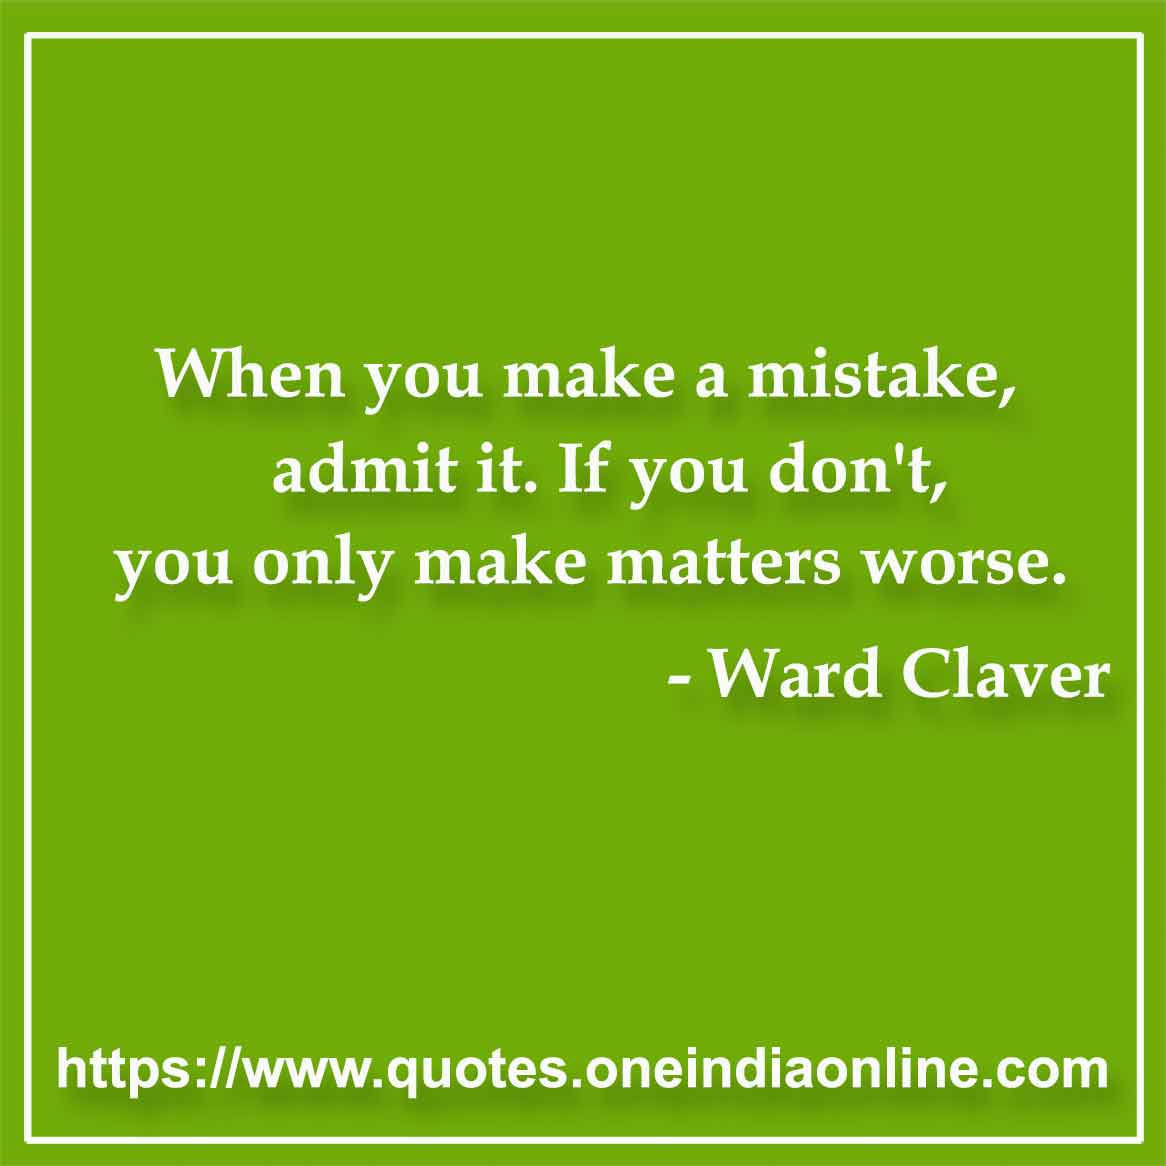 When you make a mistake, admit it. If you don't, you only make matters worse.

- Ward Claver Quotes